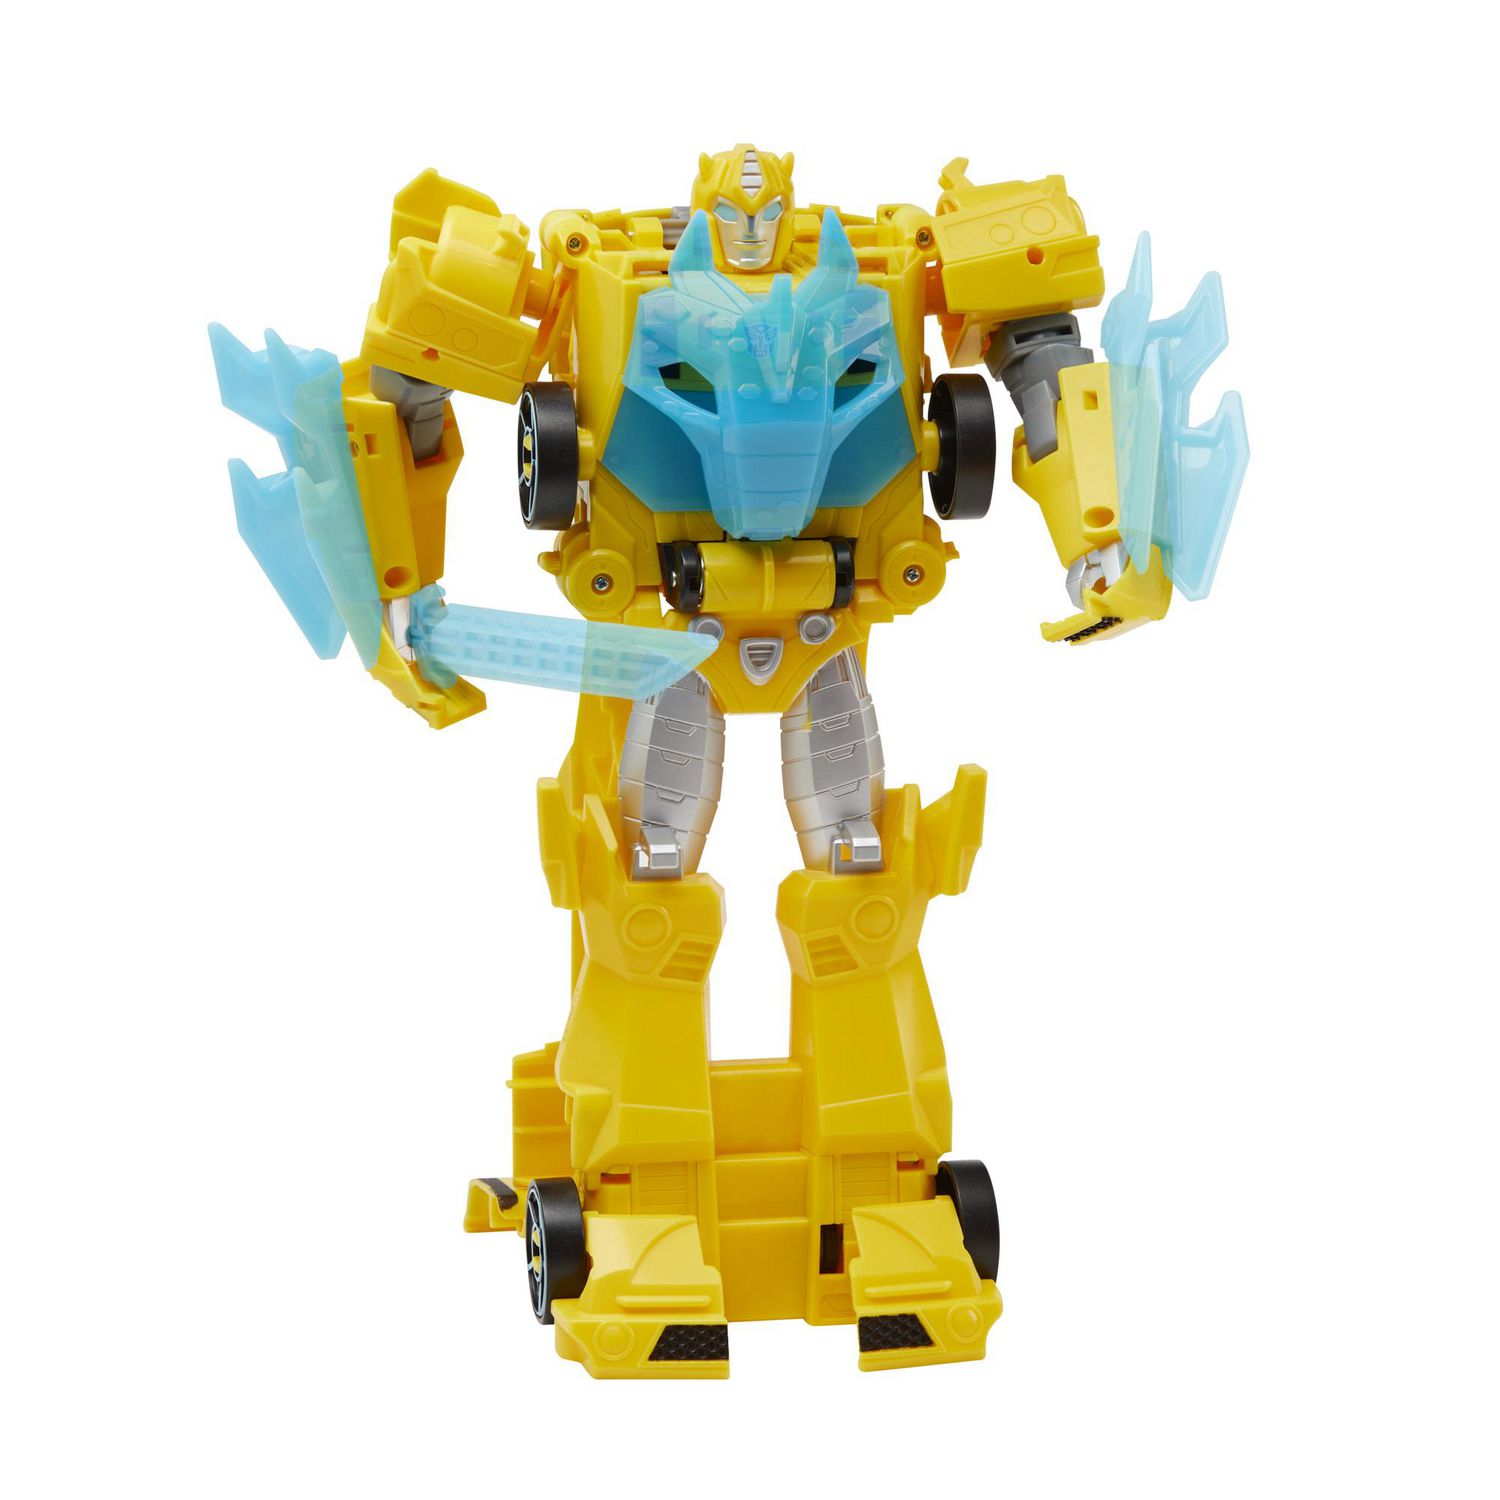  Transformers Bumblebee Cyberverse Adventures Toys Ultimate  Class Iaconus Action Figure, Energon Armor, for Kids Ages 6 and Up, 9-inch  : Toys & Games